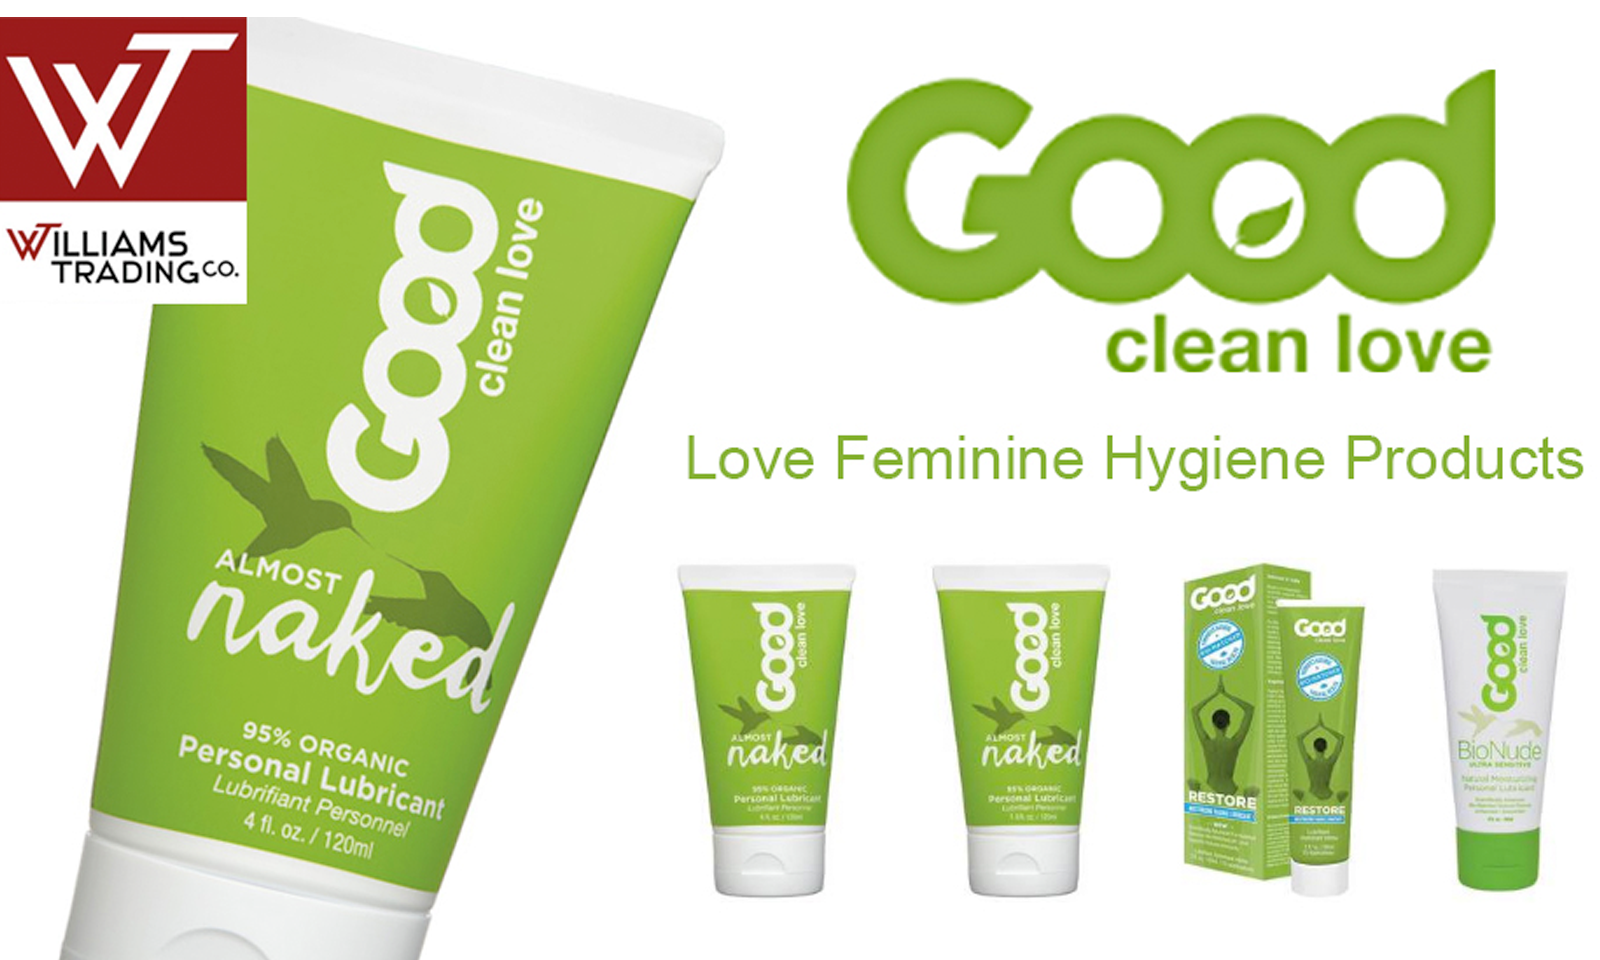 Good Clean Love Added to Williams Trading Product Assortment